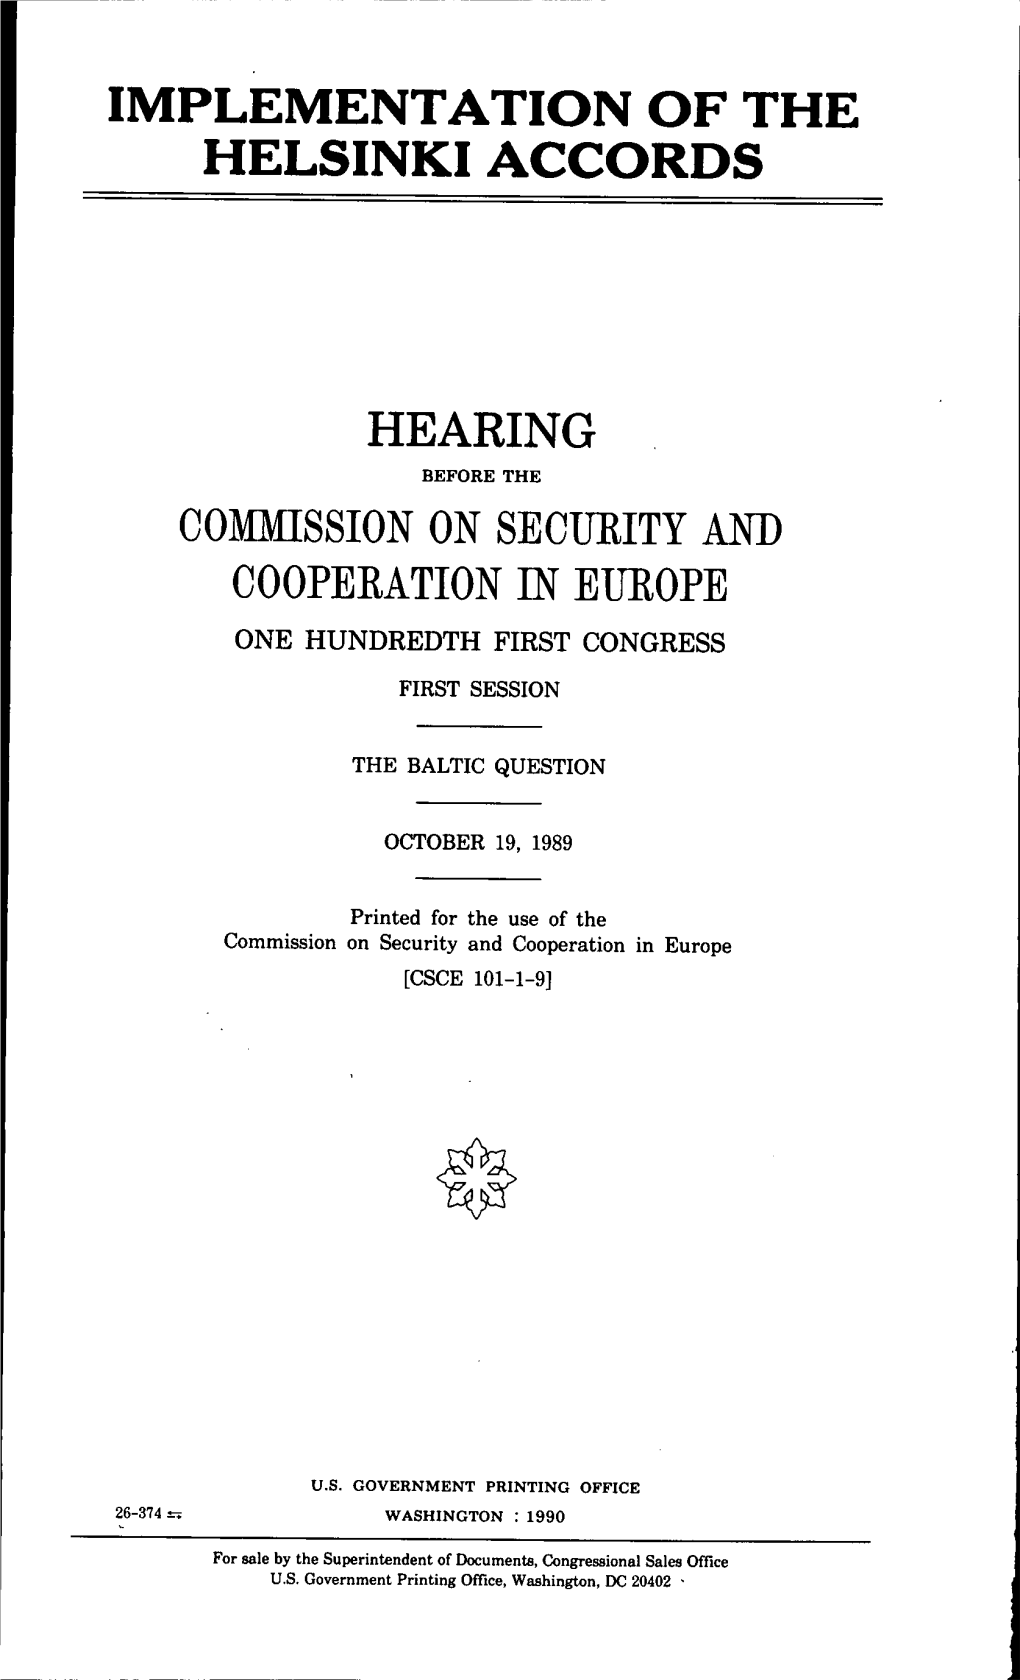 Hearing the Baltic Question 1989.Pdf